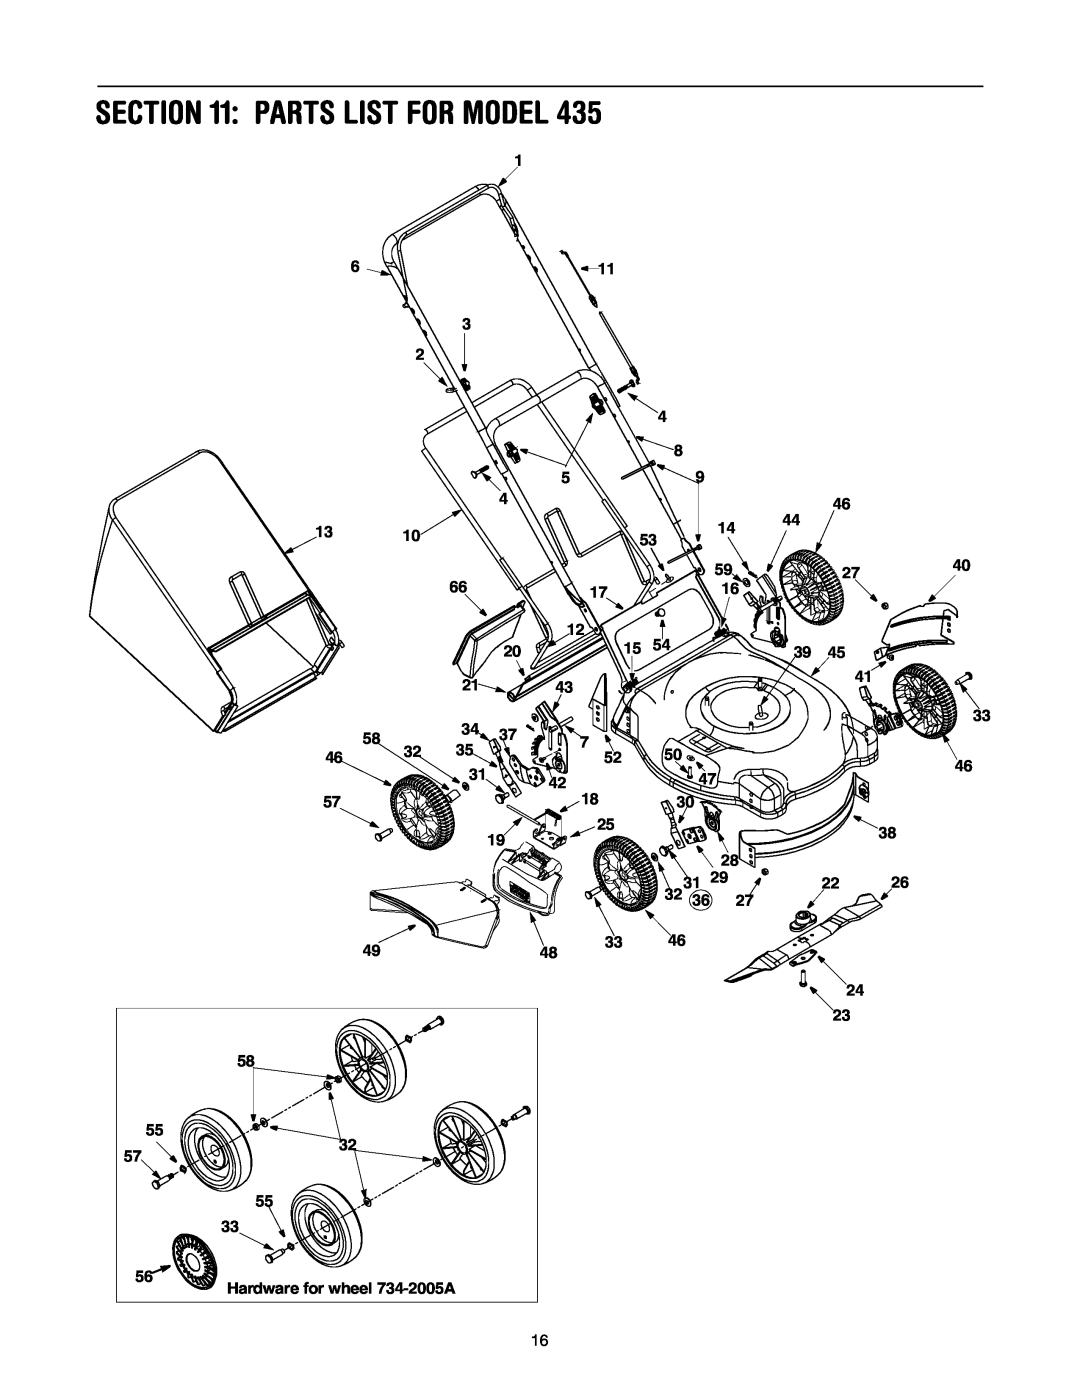 MTD 435 manual Parts List For Model, 24 23 58 55 32 57 55, Hardware for wheel 734-2005A 